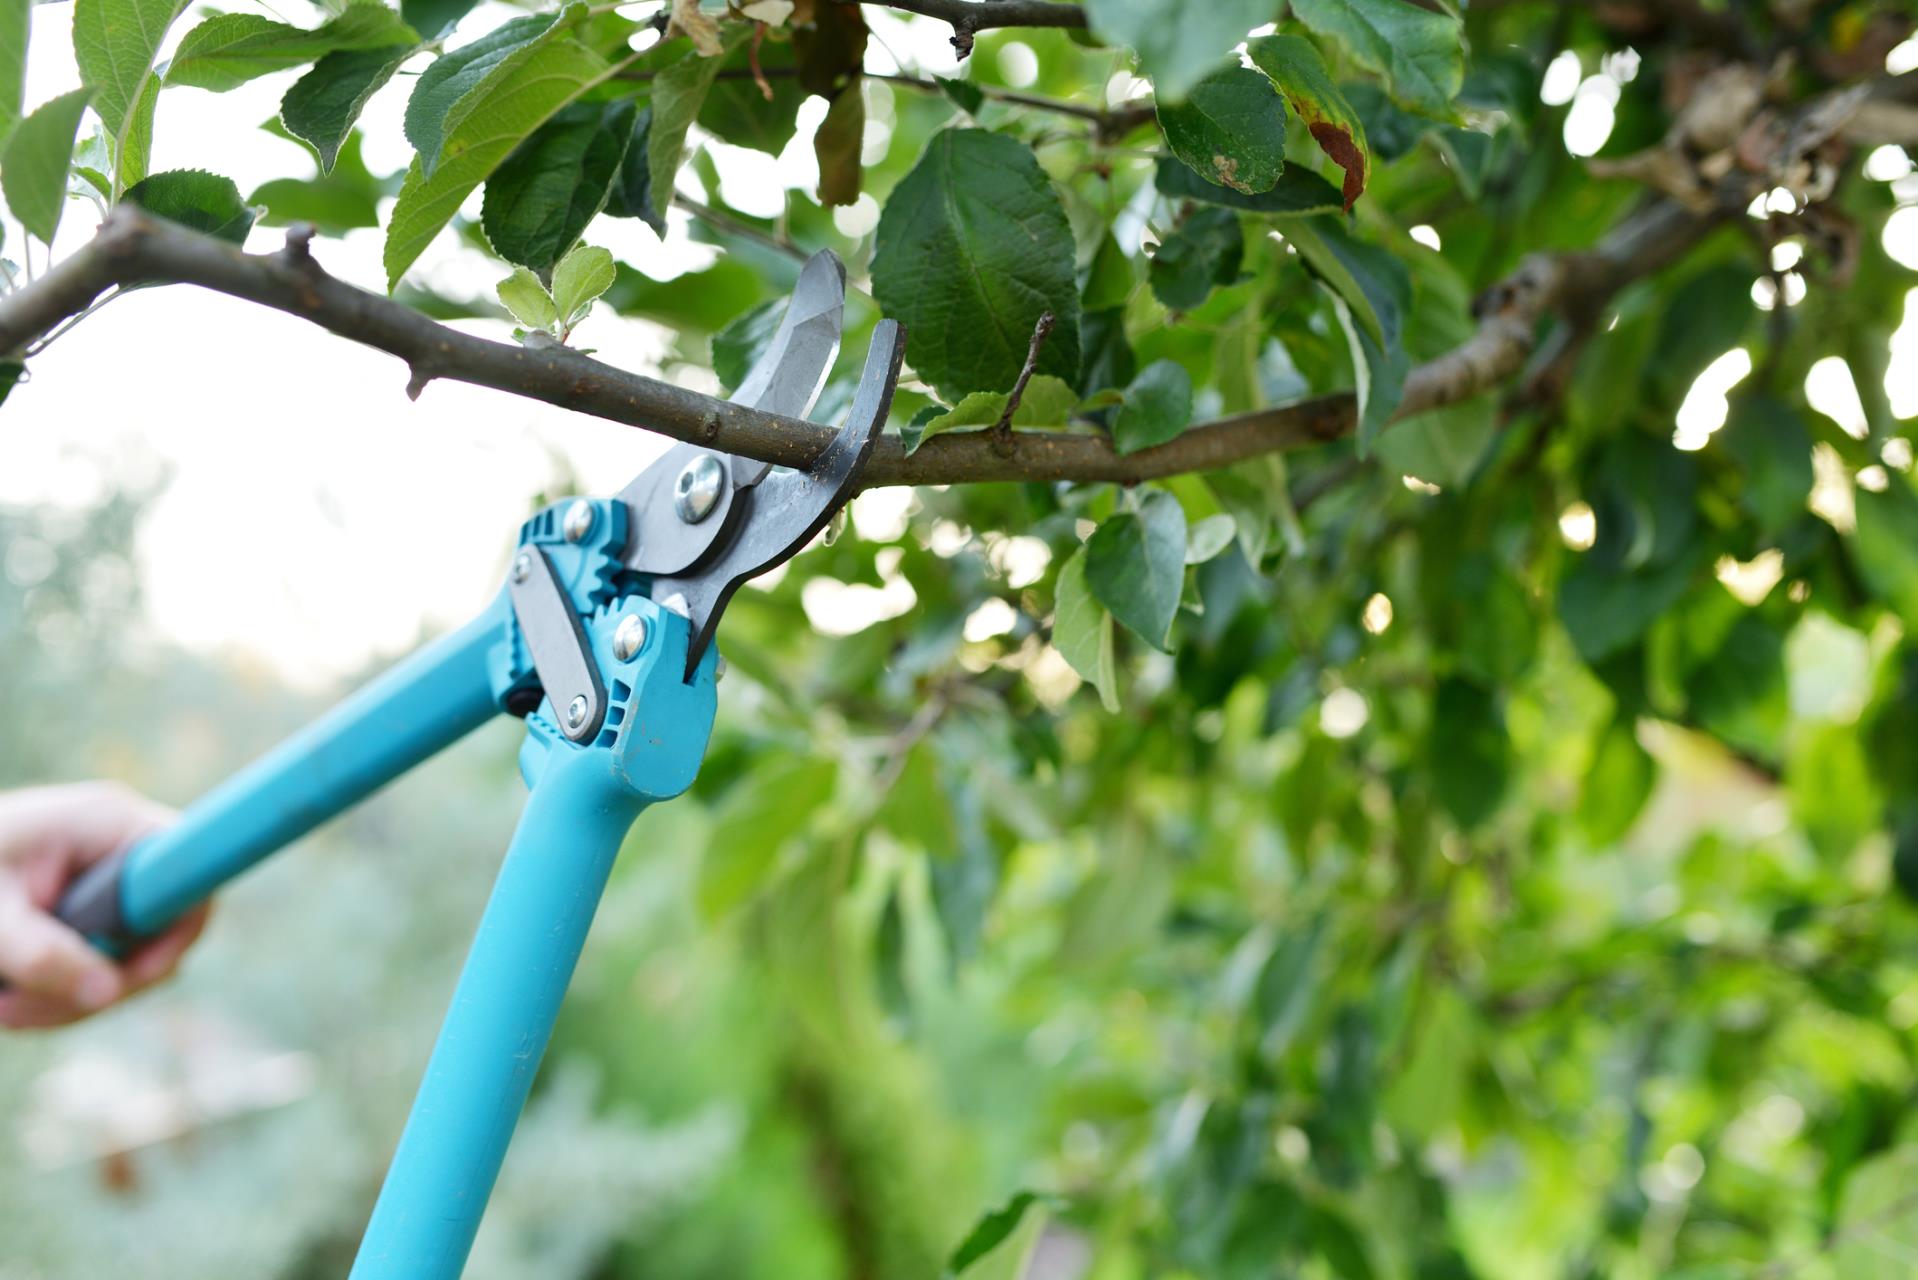 Upcoming tree pruning in public spaces for a safer cyclone season